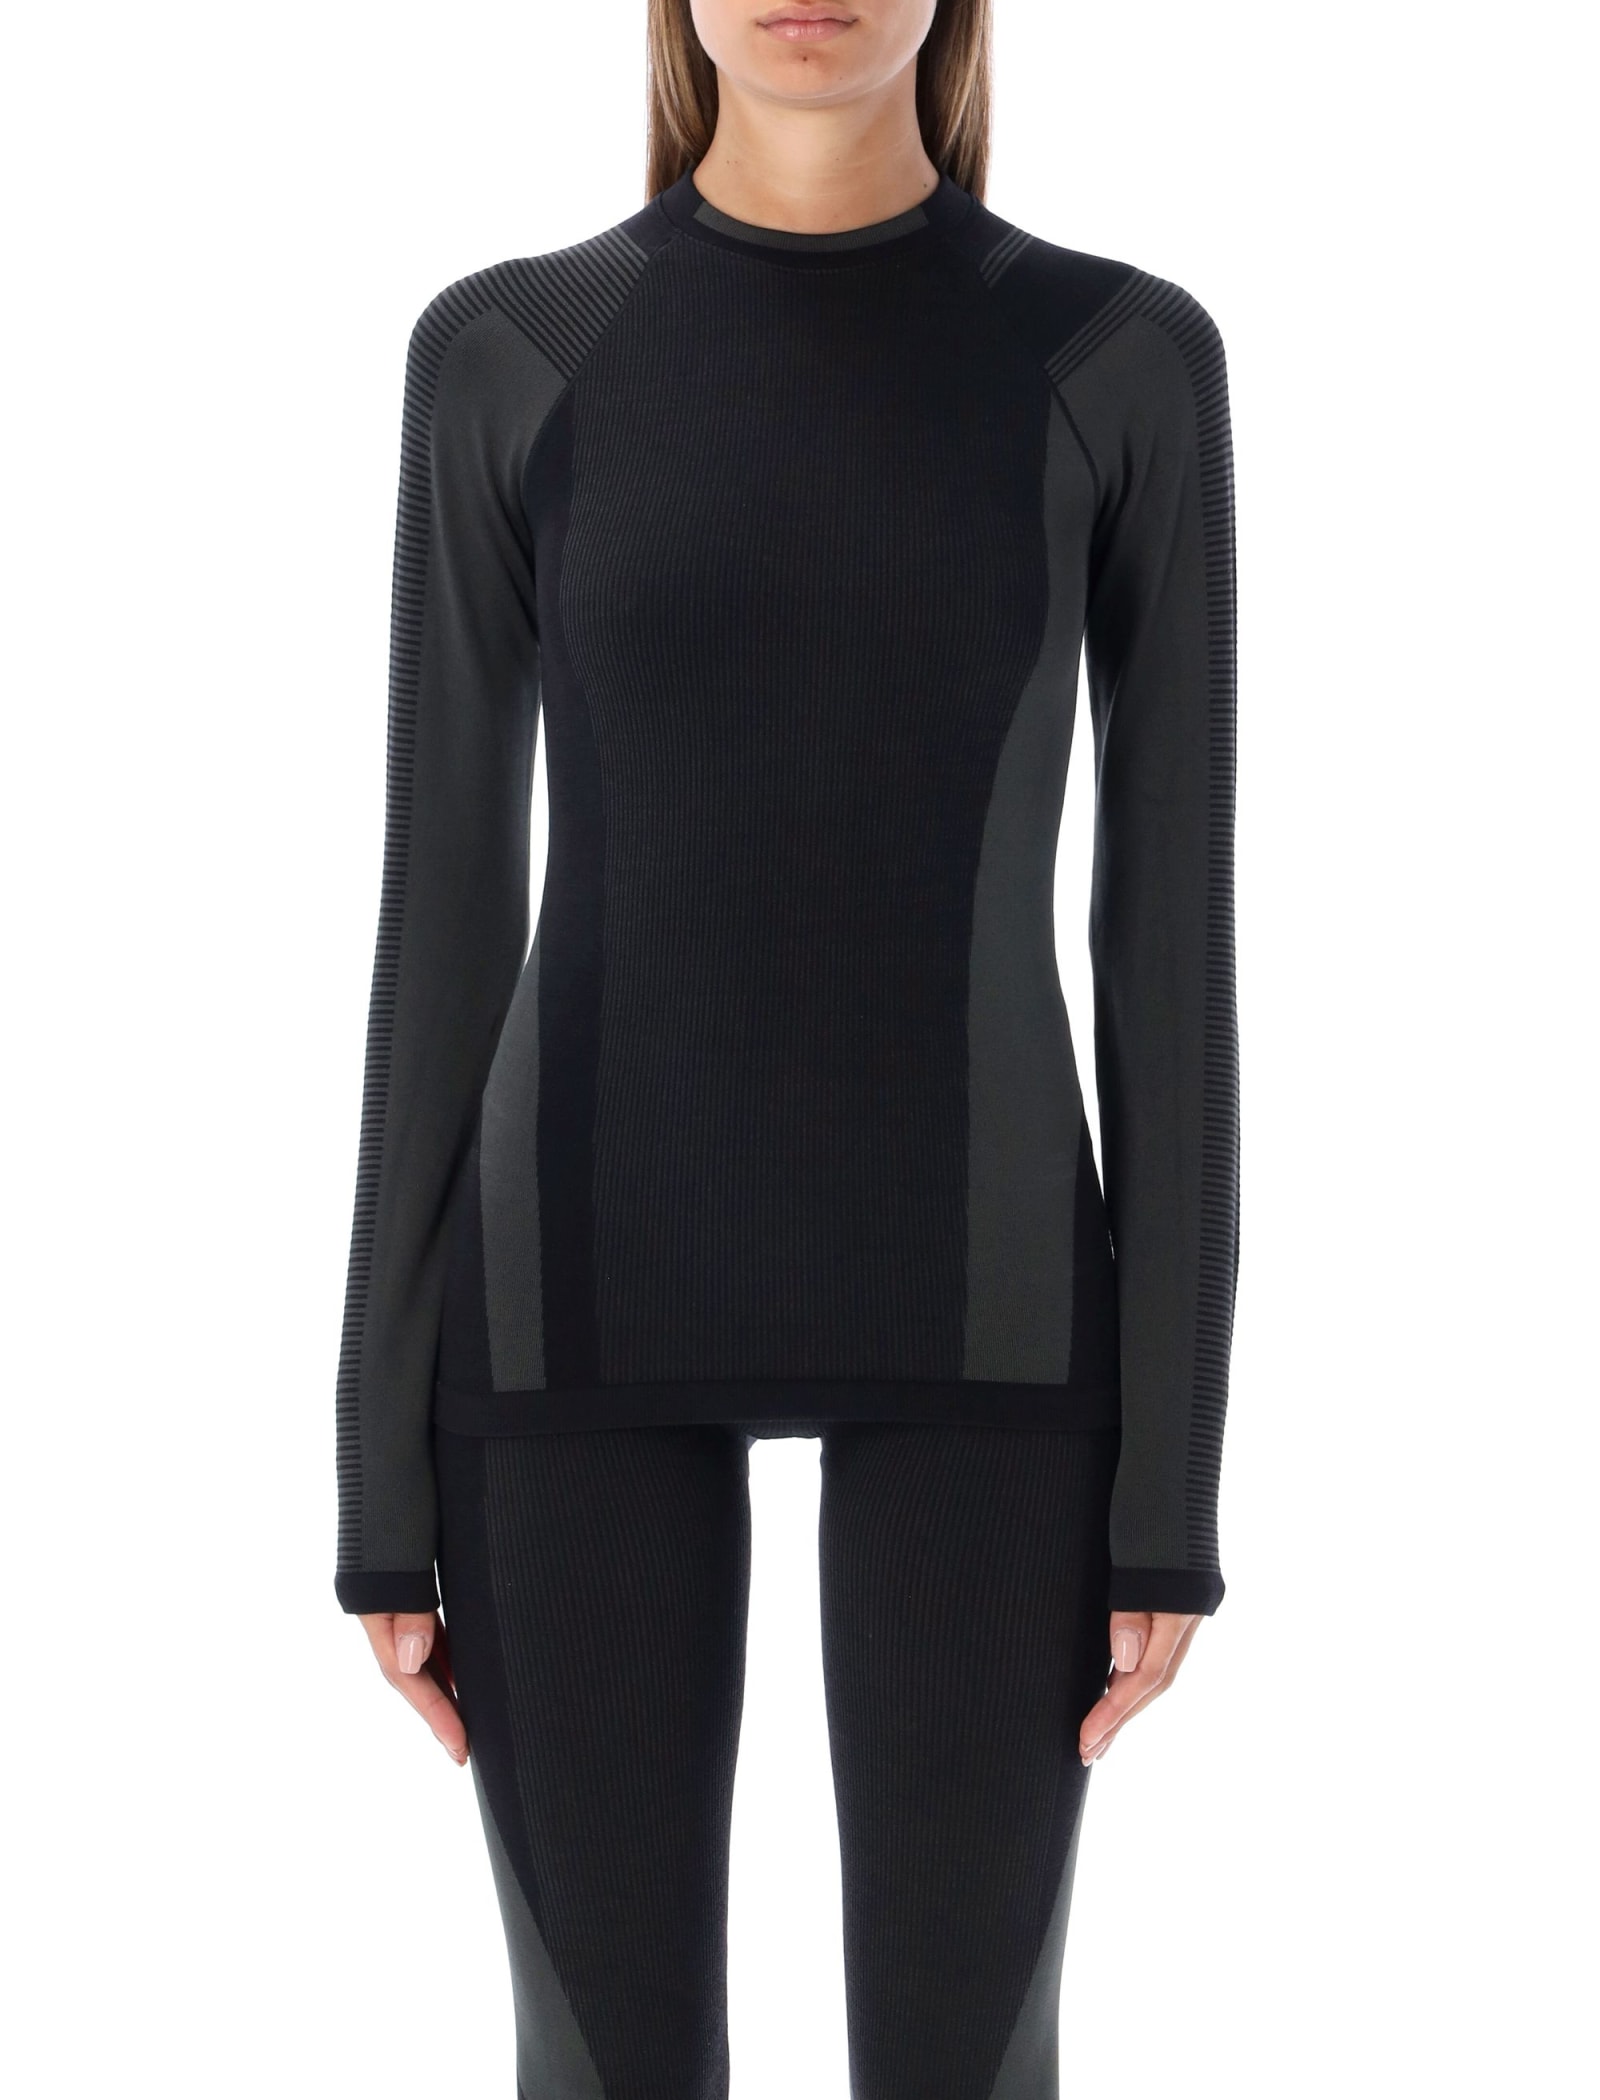 Y-3 Long Sleeves Seamless Active Top